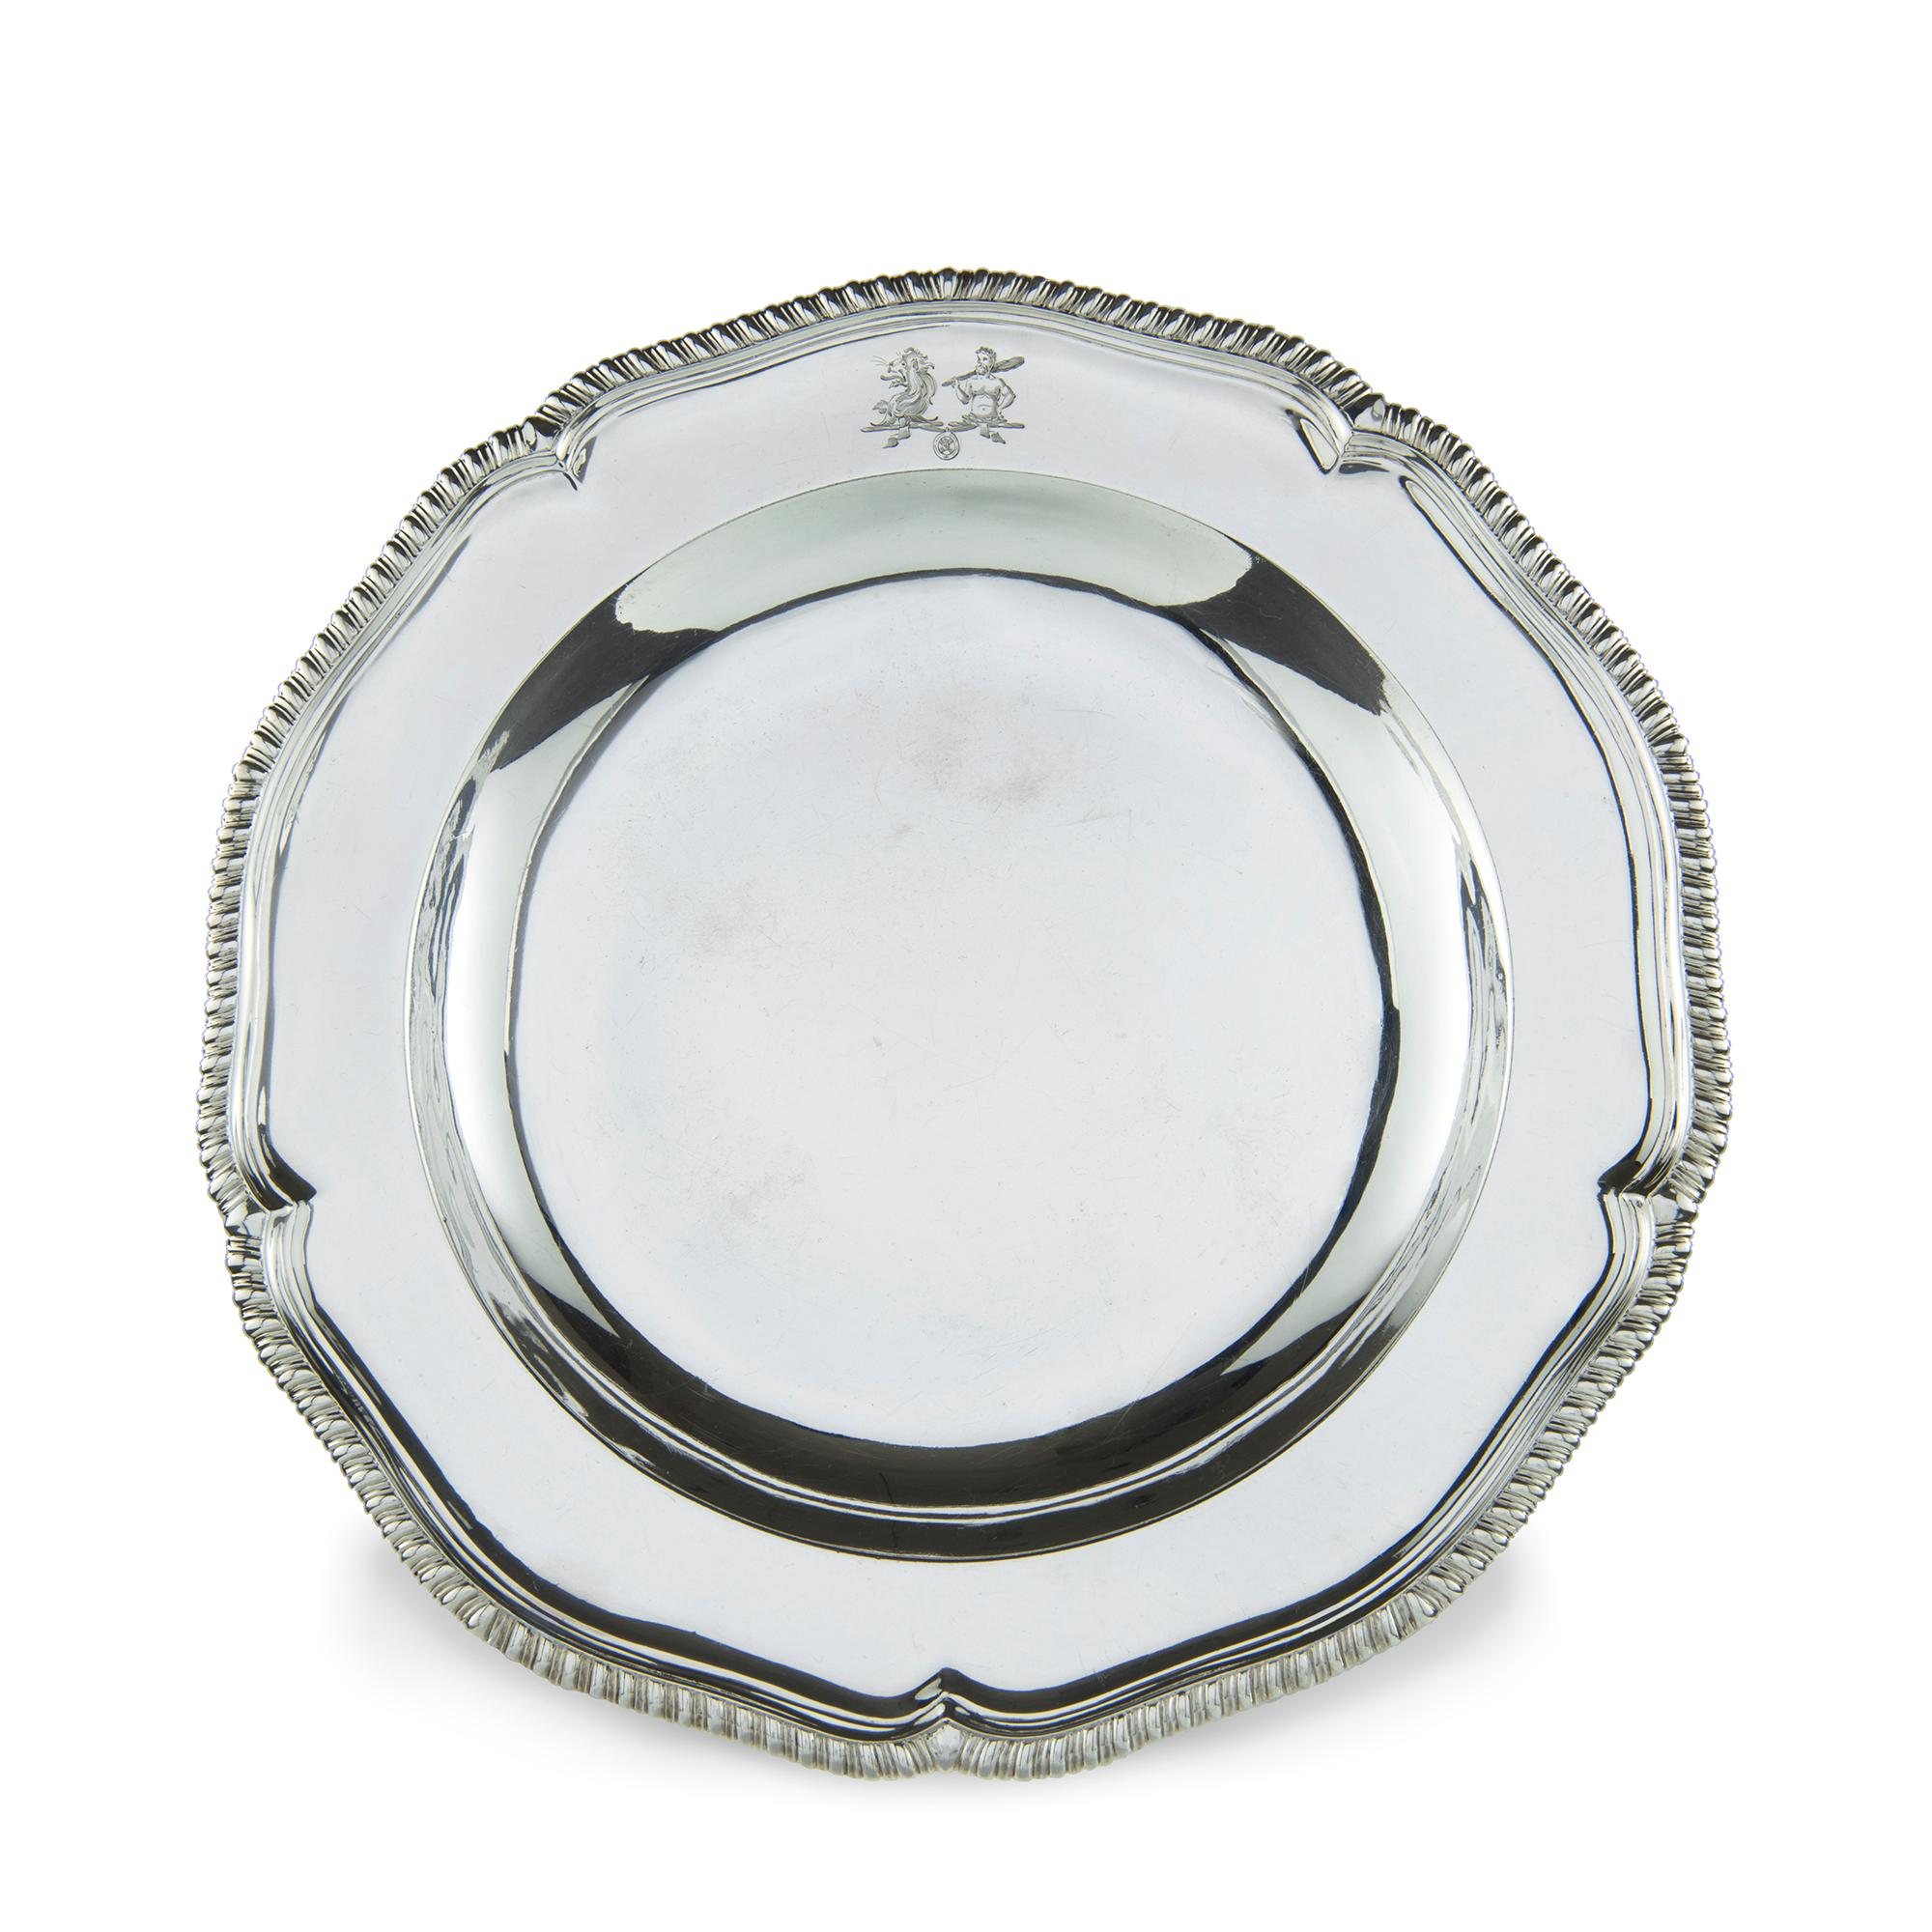 A set of twelve Georgian sterling silver dinner-plates, eleven with the mark of Thomas Heming, London, 1774, one with the mark of Sebastian and James Crespell, London, 1769
Each shaped circular with gadrooned border, later engraved with two crests,